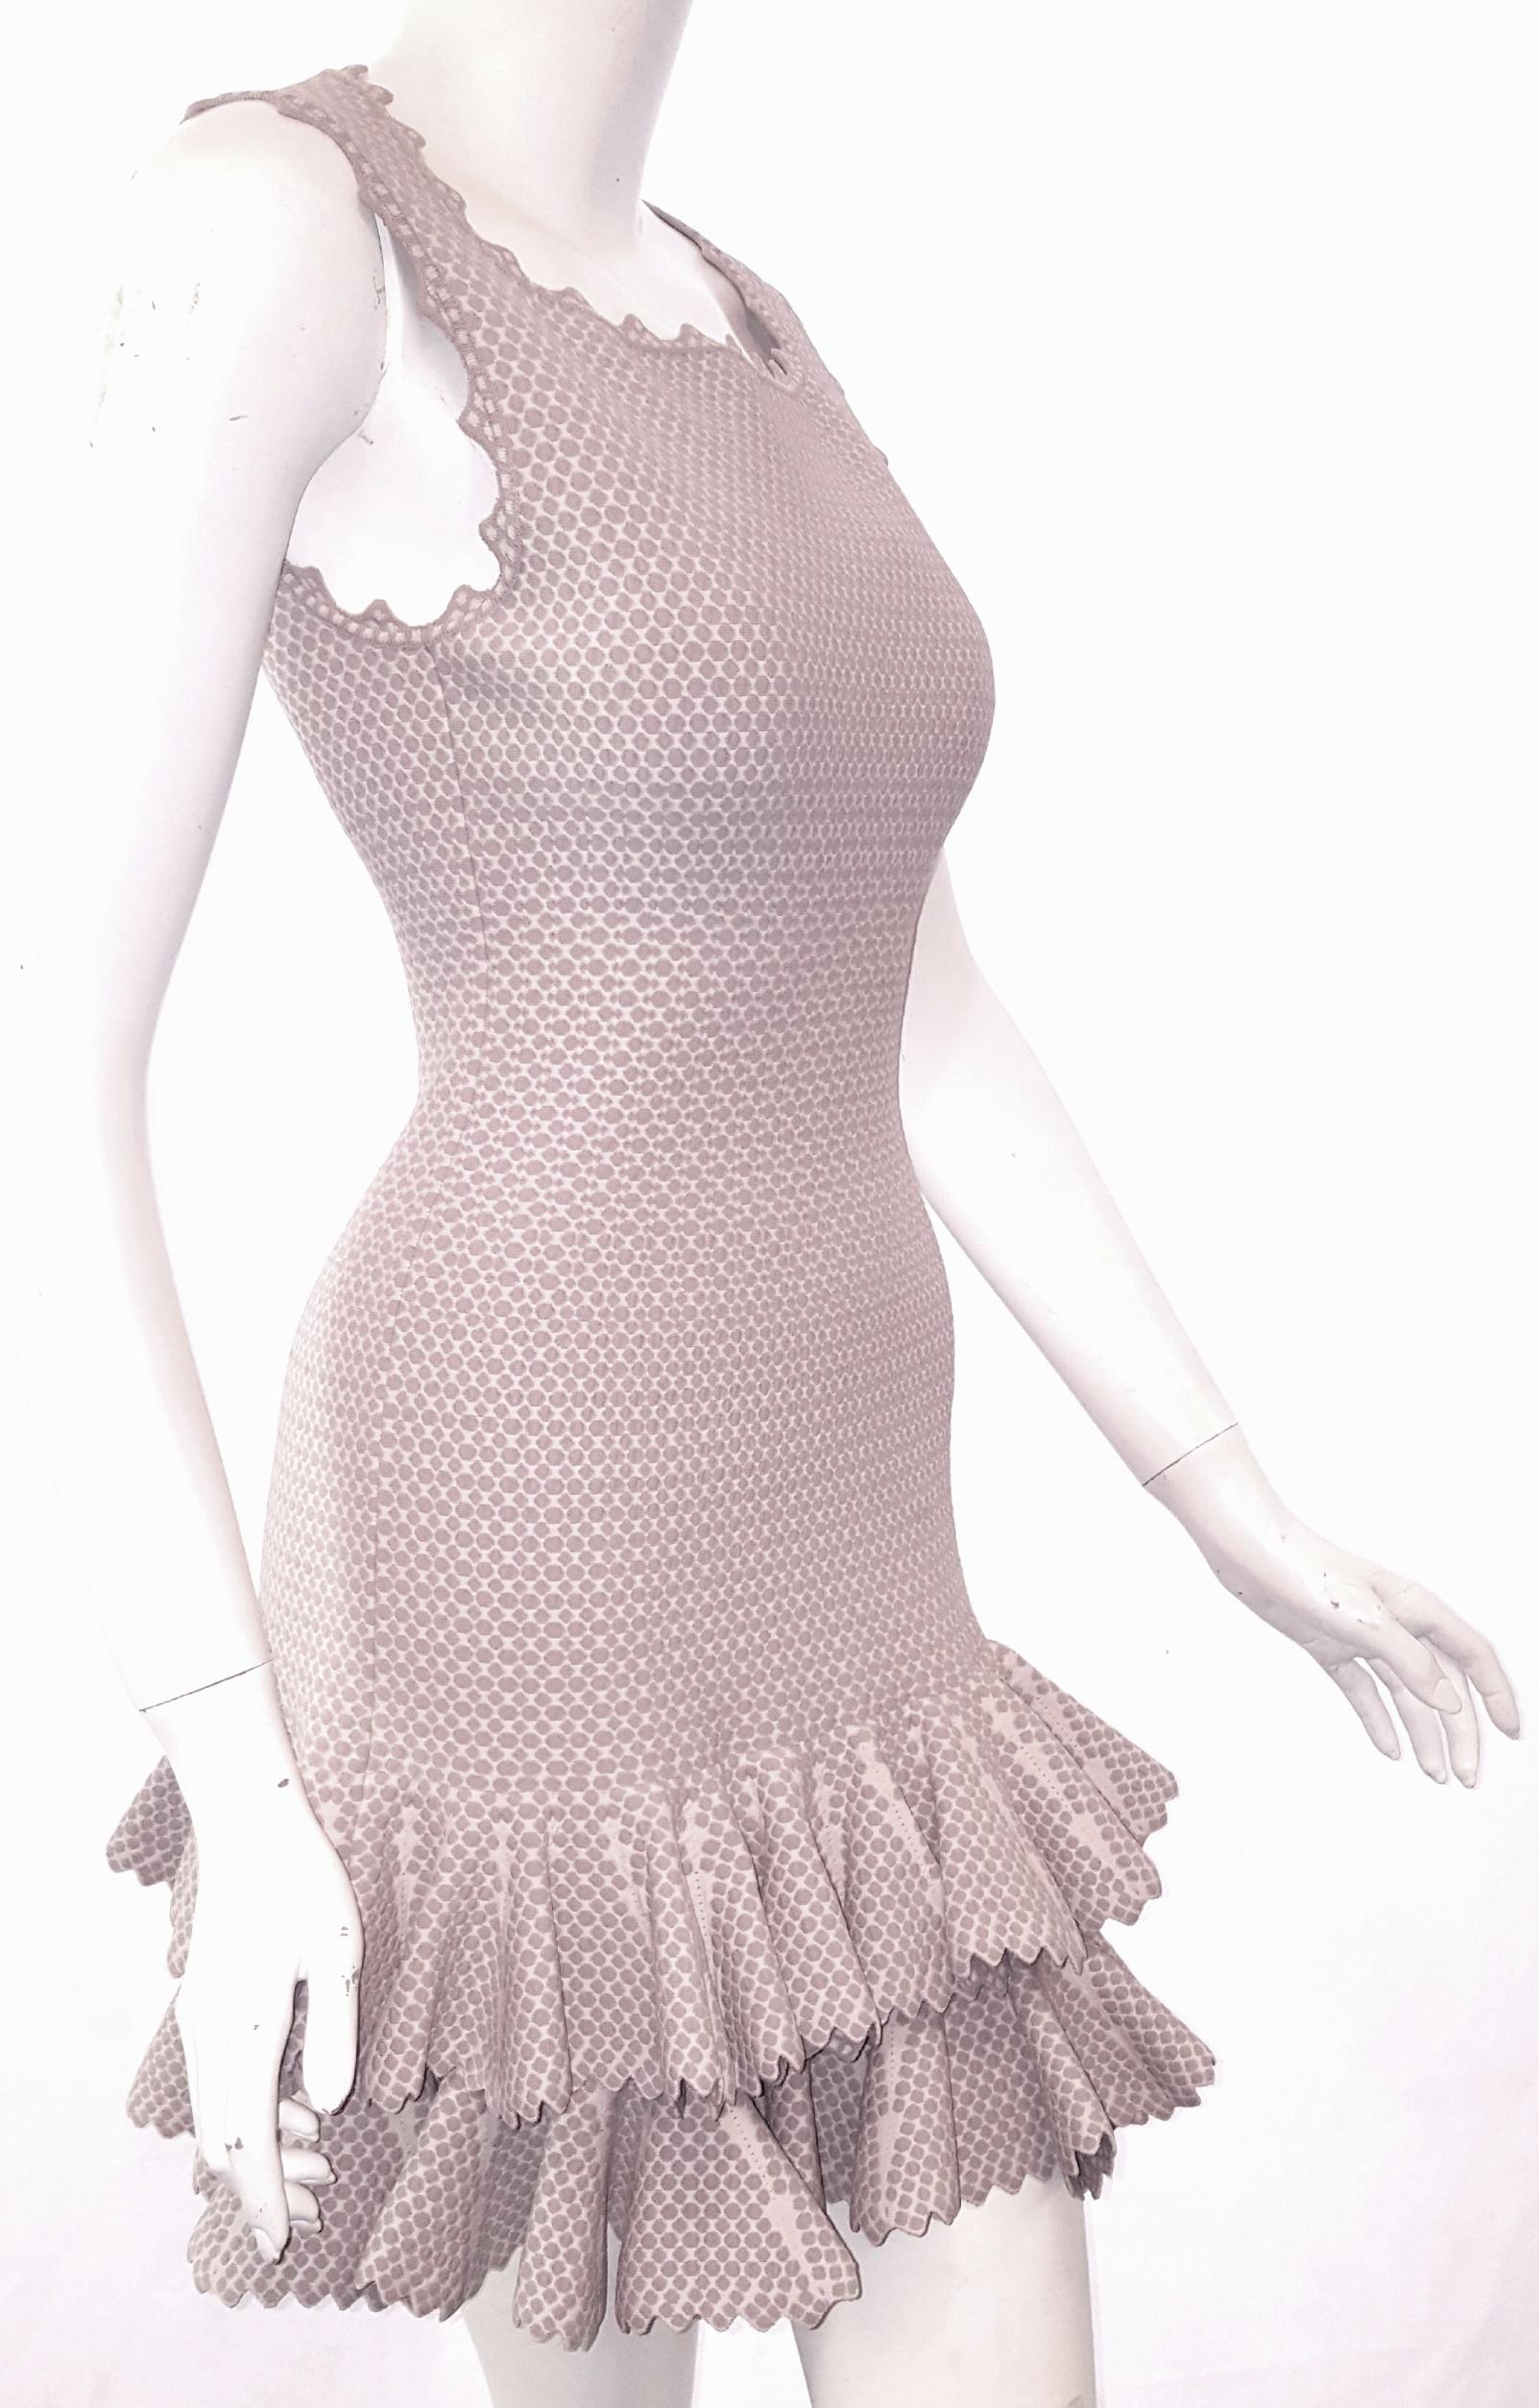 Alaïa is the choice of women for body conscious and enhancing garments.  This sleeveless, two tier ruffle dress is feminine yet sexy at the same time.  Elongated dropped waist is accentuated by a square neckline with zig-zag trim all around